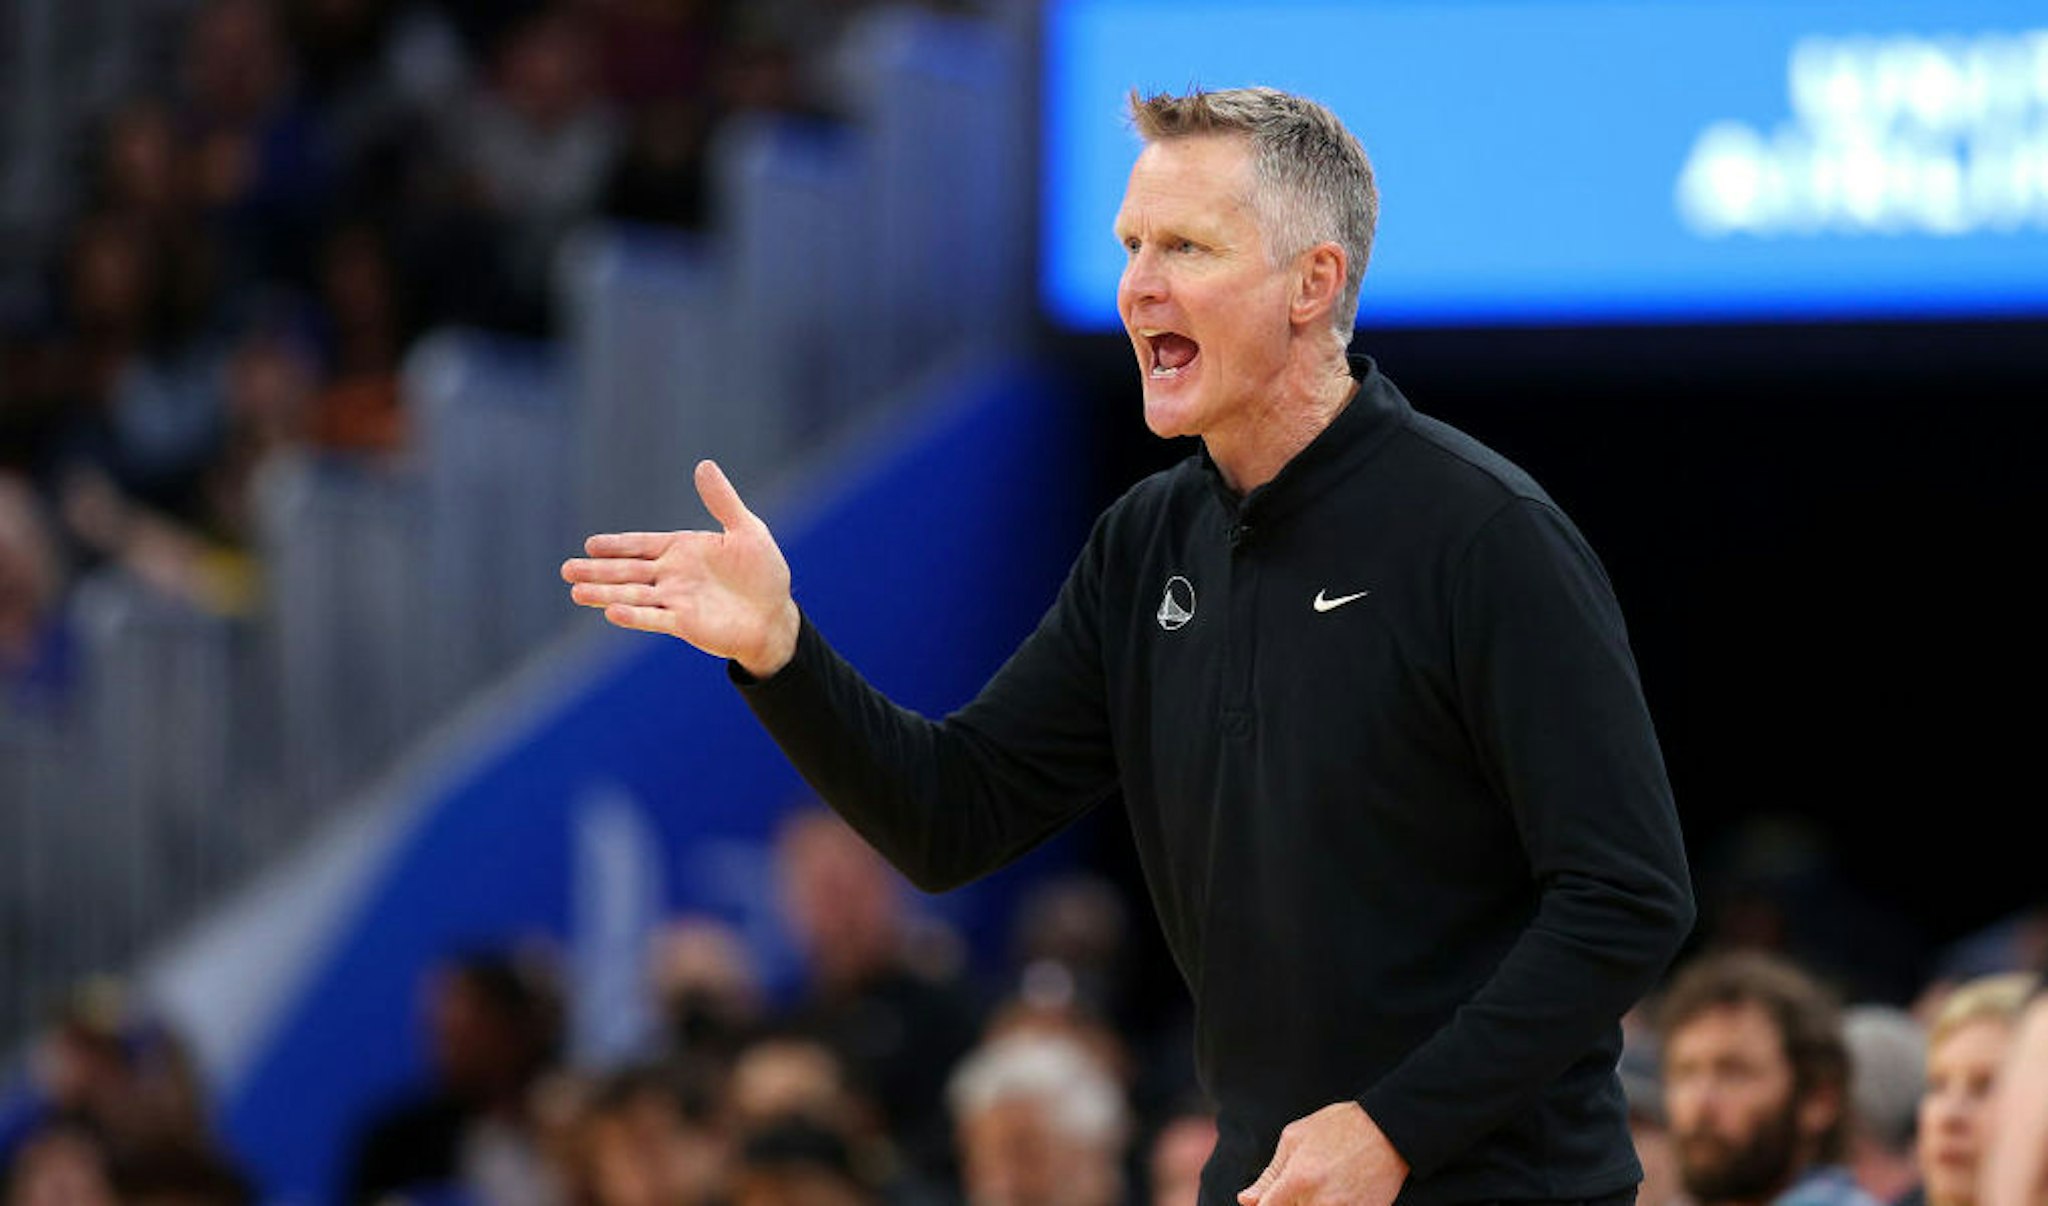 SAN FRANCISCO, CALIFORNIA - APRIL 16: Golden State Warriors head coach Steve Kerr shouts to his team against the Denver Nuggets in the second half during Game One of the Western Conference First Round NBA Playoffs at Chase Center on April 16, 2022 in San Francisco, California. NOTE TO USER: User expressly acknowledges and agrees that, by downloading and/or using this photograph, User is consenting to the terms and conditions of the Getty Images License Agreement. (Photo by Ezra Shaw/Getty Images)